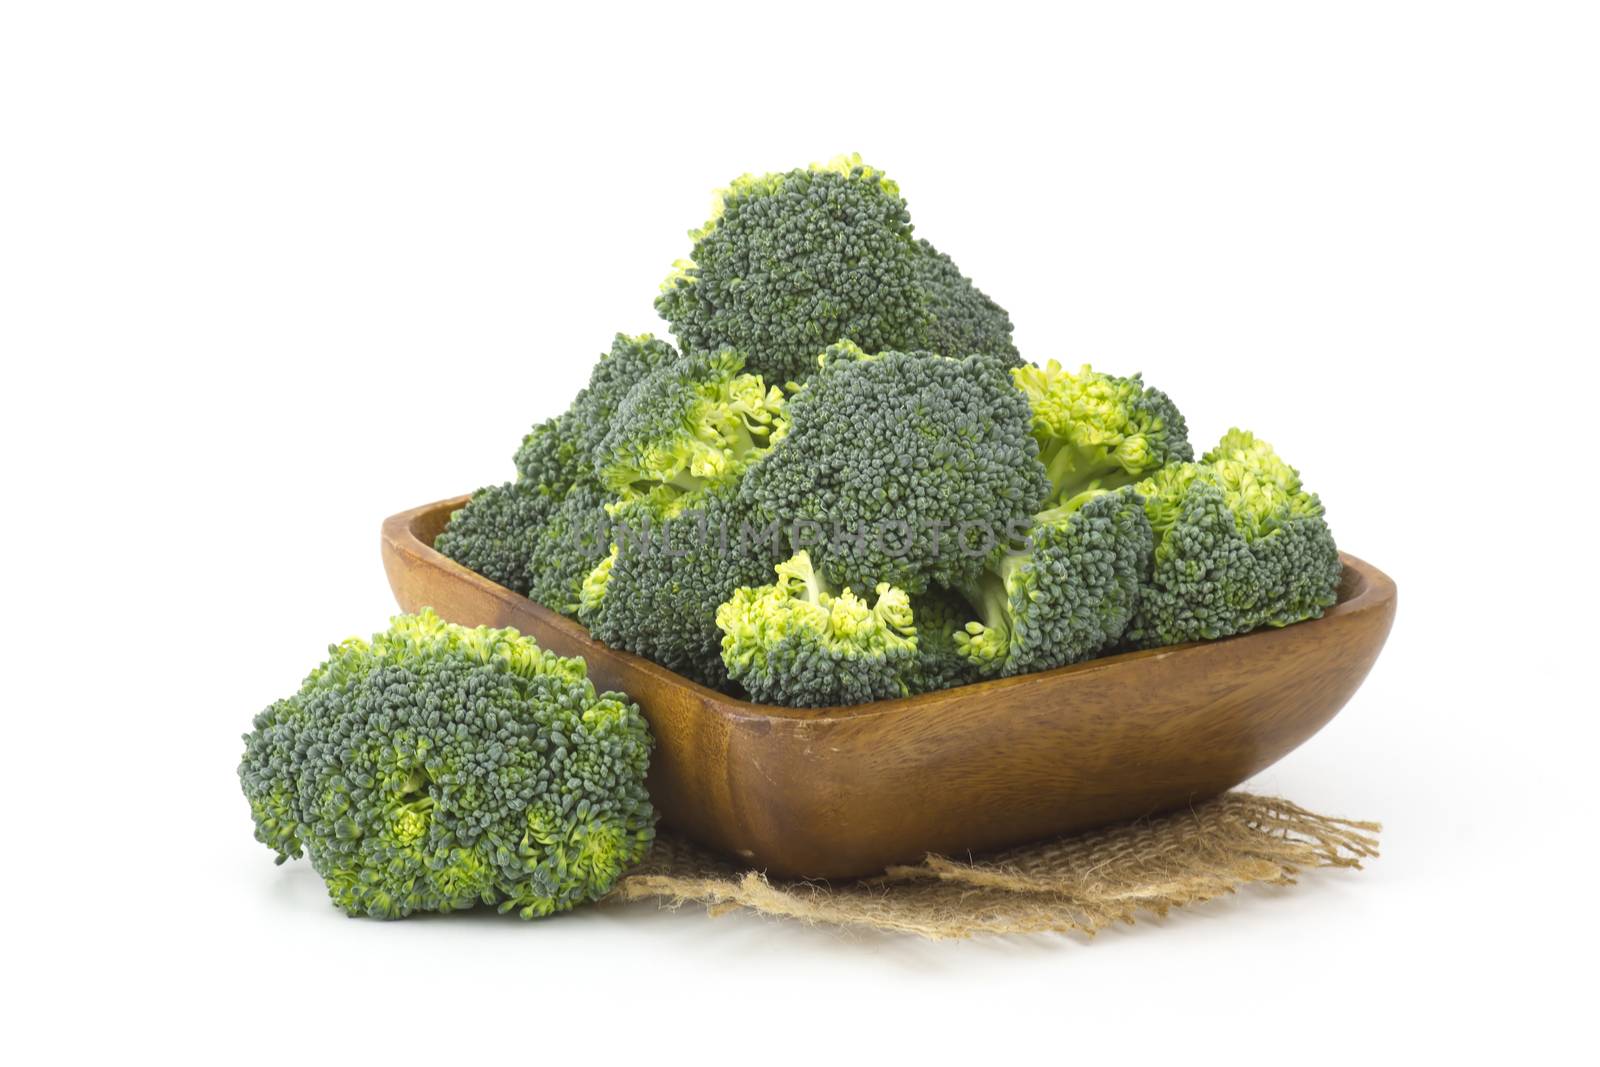 Raw broccoli in a bowl on white background